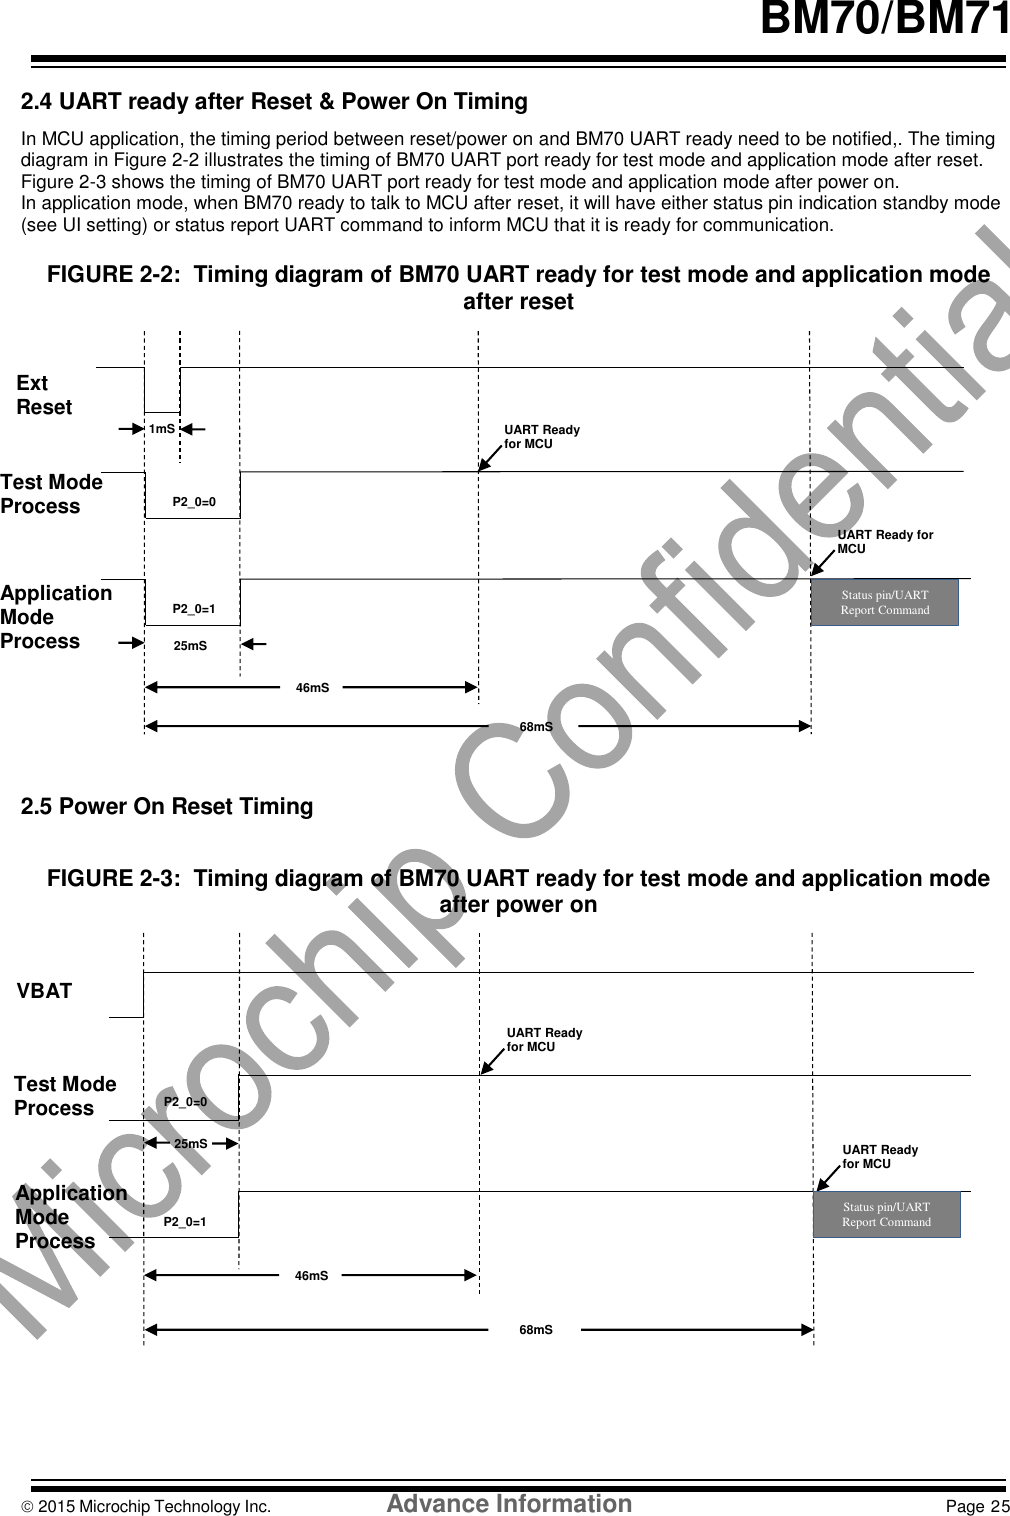    BM70/BM71   2.4 UART ready after Reset &amp; Power On Timing  In MCU application, the timing period between reset/power on and BM70 UART ready need to be notified,. The timing diagram in Figure 2-2 illustrates the timing of BM70 UART port ready for test mode and application mode after reset. Figure 2-3 shows the timing of BM70 UART port ready for test mode and application mode after power on. In application mode, when BM70 ready to talk to MCU after reset, it will have either status pin indication standby mode (see UI setting) or status report UART command to inform MCU that it is ready for communication.  FIGURE 2-2:  Timing diagram of BM70 UART ready for test mode and application mode after reset                            2.5 Power On Reset Timing   FIGURE 2-3:  Timing diagram of BM70 UART ready for test mode and application mode after power on                      2015 Microchip Technology Inc.                Advance Information                                      Page 25   1mS 25mS 46mS 68mS Ext Reset Test Mode Process Application Mode Process P2_0=0 P2_0=1 UART Ready for MCU UART Ready for MCU Status pin/UART Report Command VBAT Test Mode Process 25mS P2_0=0 P2_0=1 UART Ready for MCU UART Ready for MCU Application Mode Process 46mS 68mS Status pin/UART Report Command 